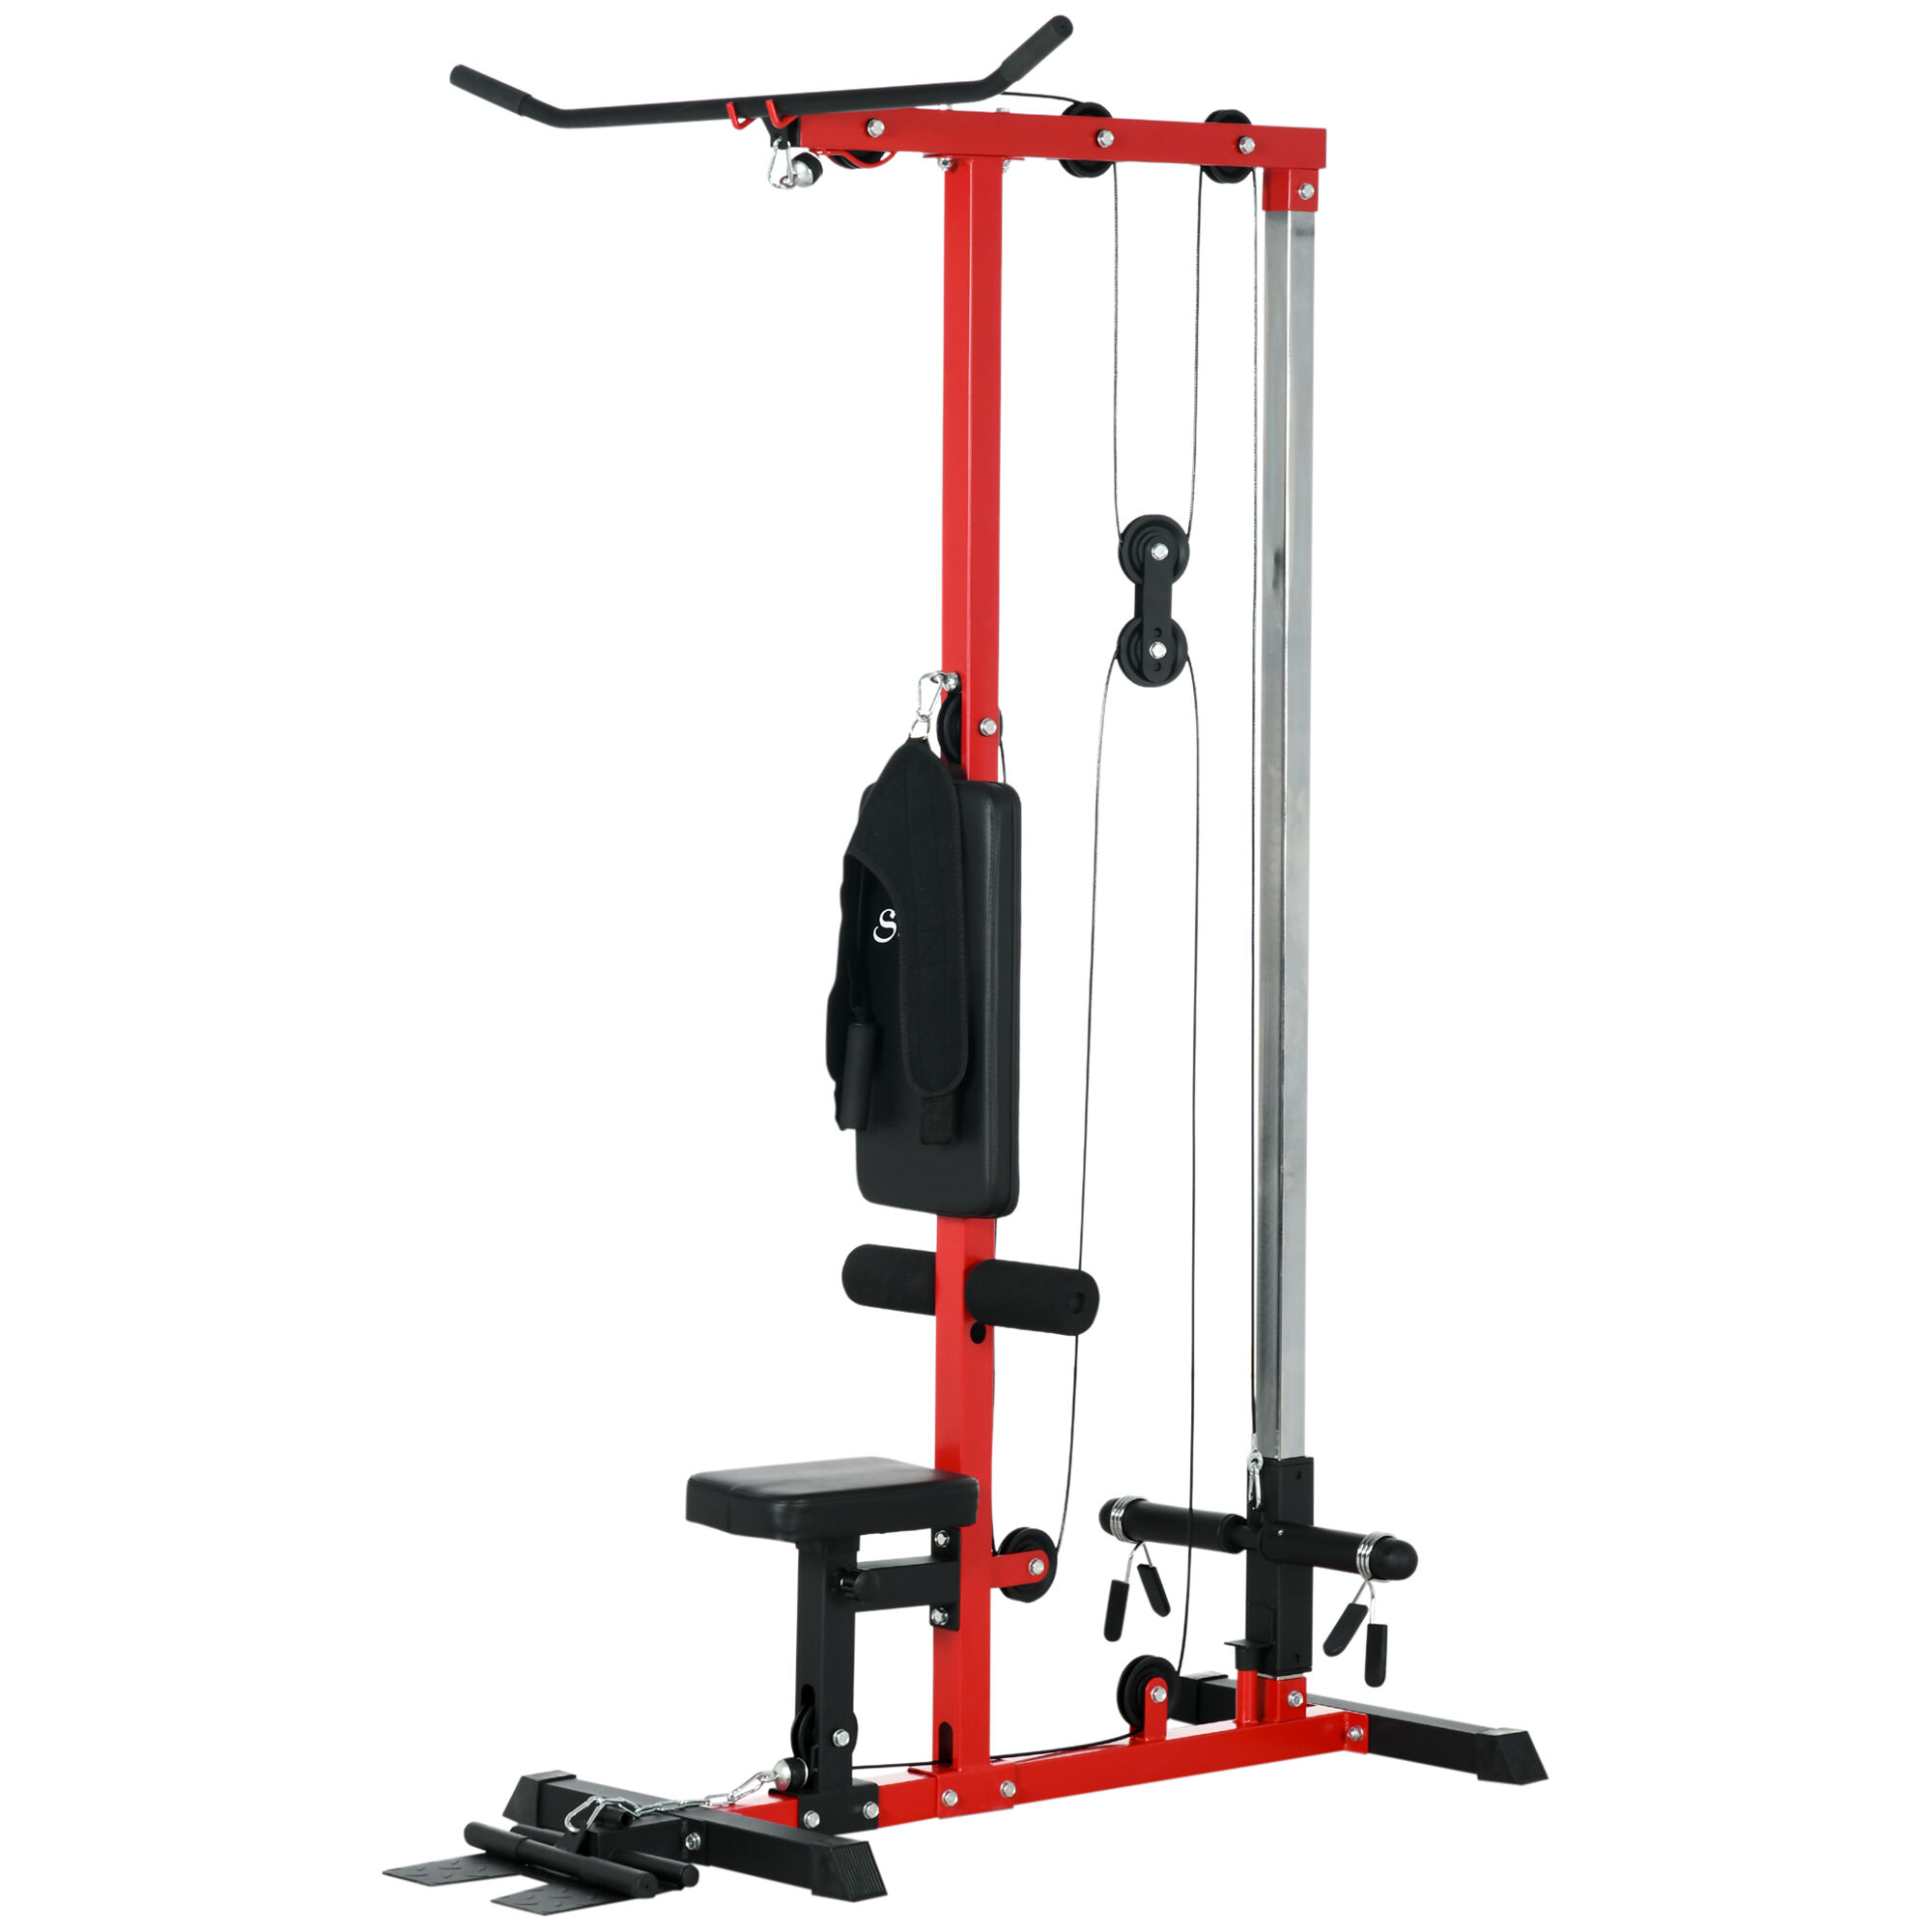 Soozier Lat Pull Down Machine High Low Pulley Adjustable Seat Flip-Up Footplate Red Home Gym Equipment   Aosom.com